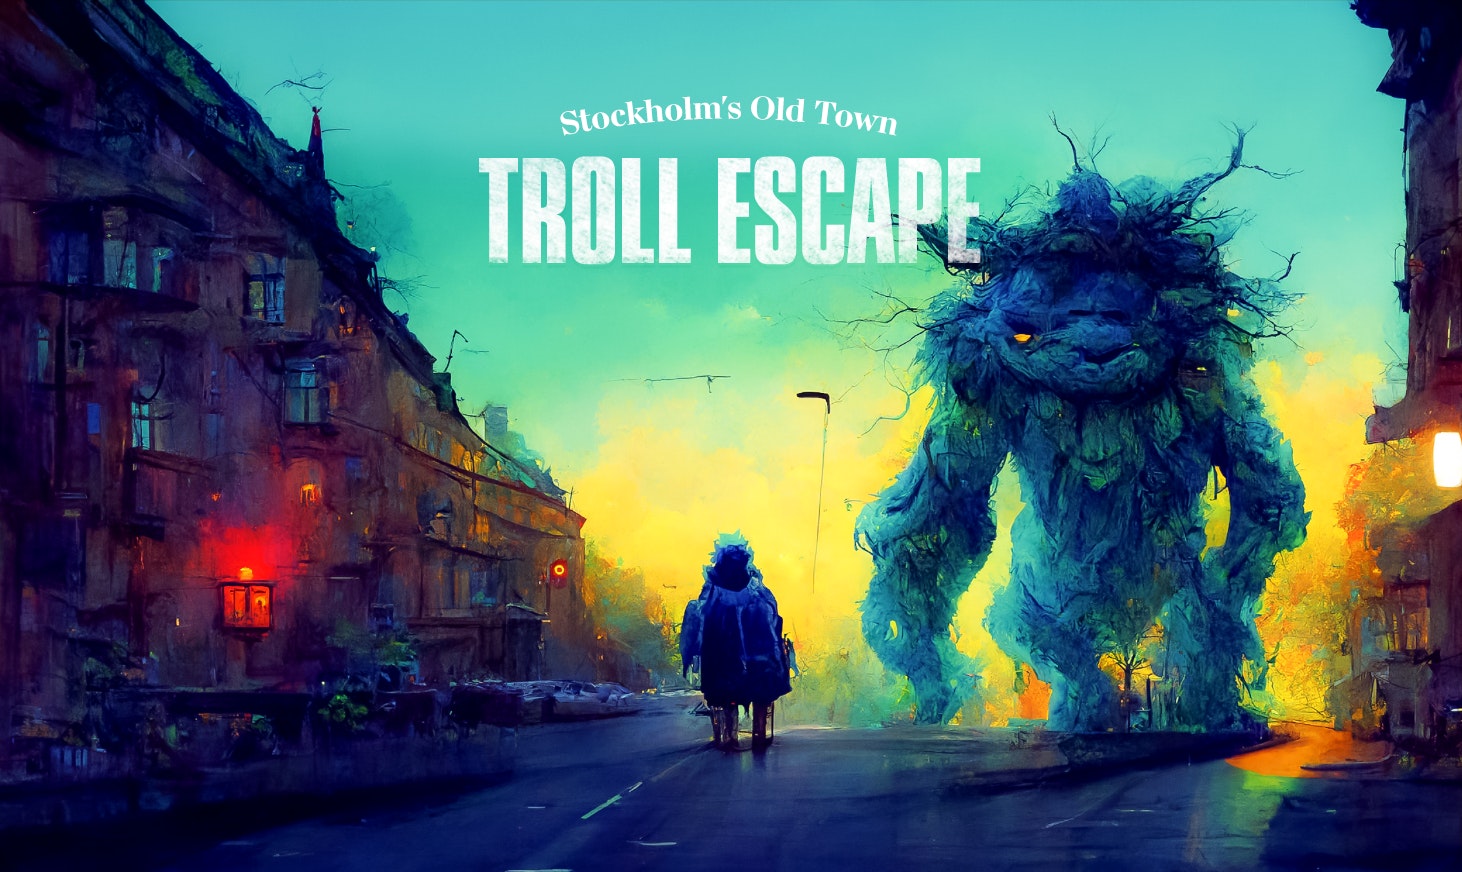 Stockholm's Old Town: Troll Escape